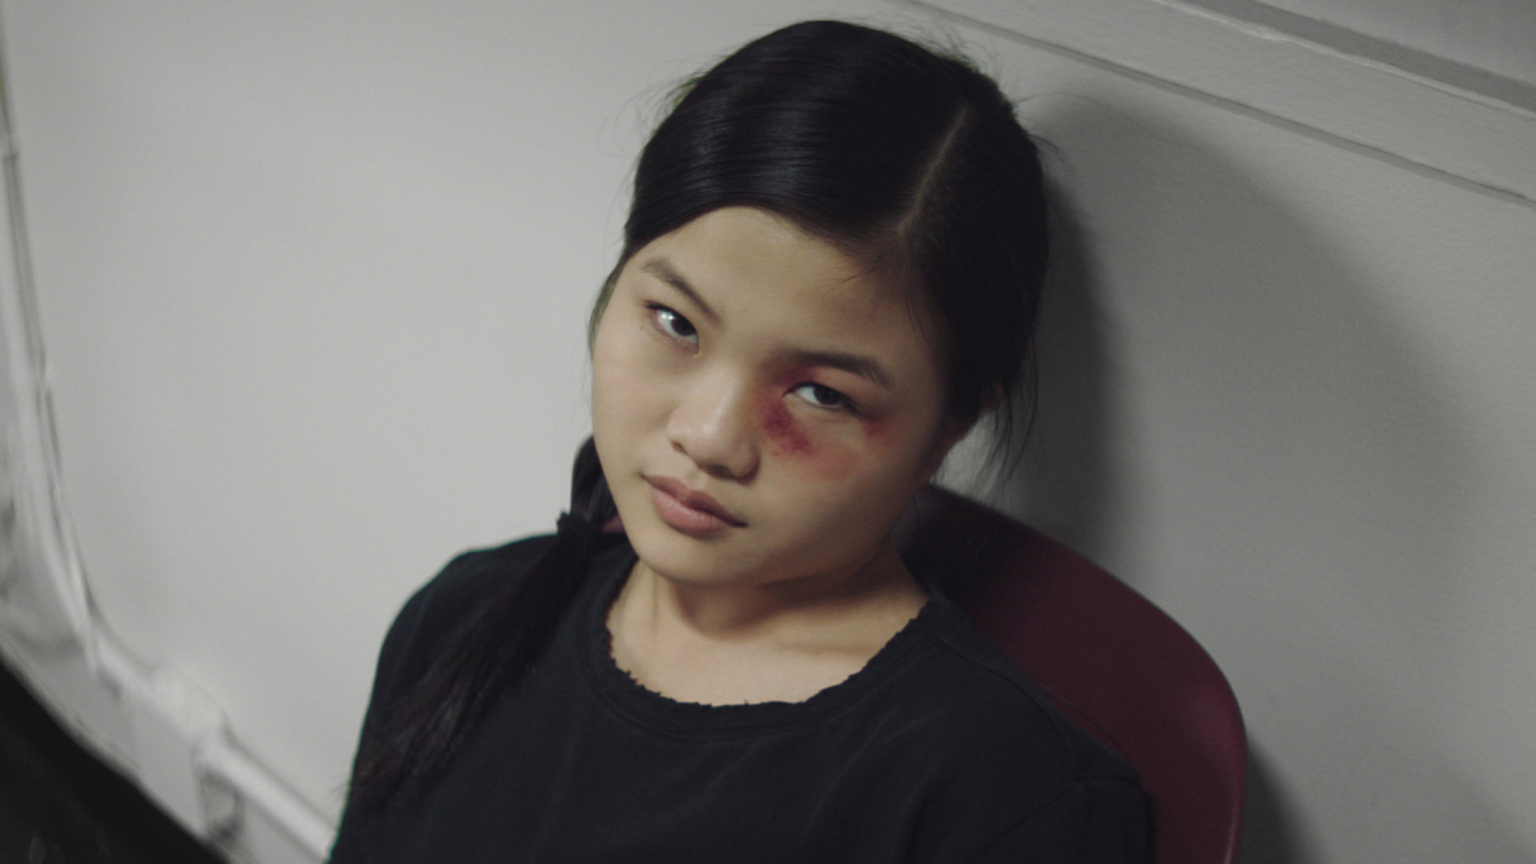 Miya Cech with a black eye as seen in Marvelous and the Black Hole an official Sundance 2021 selection.